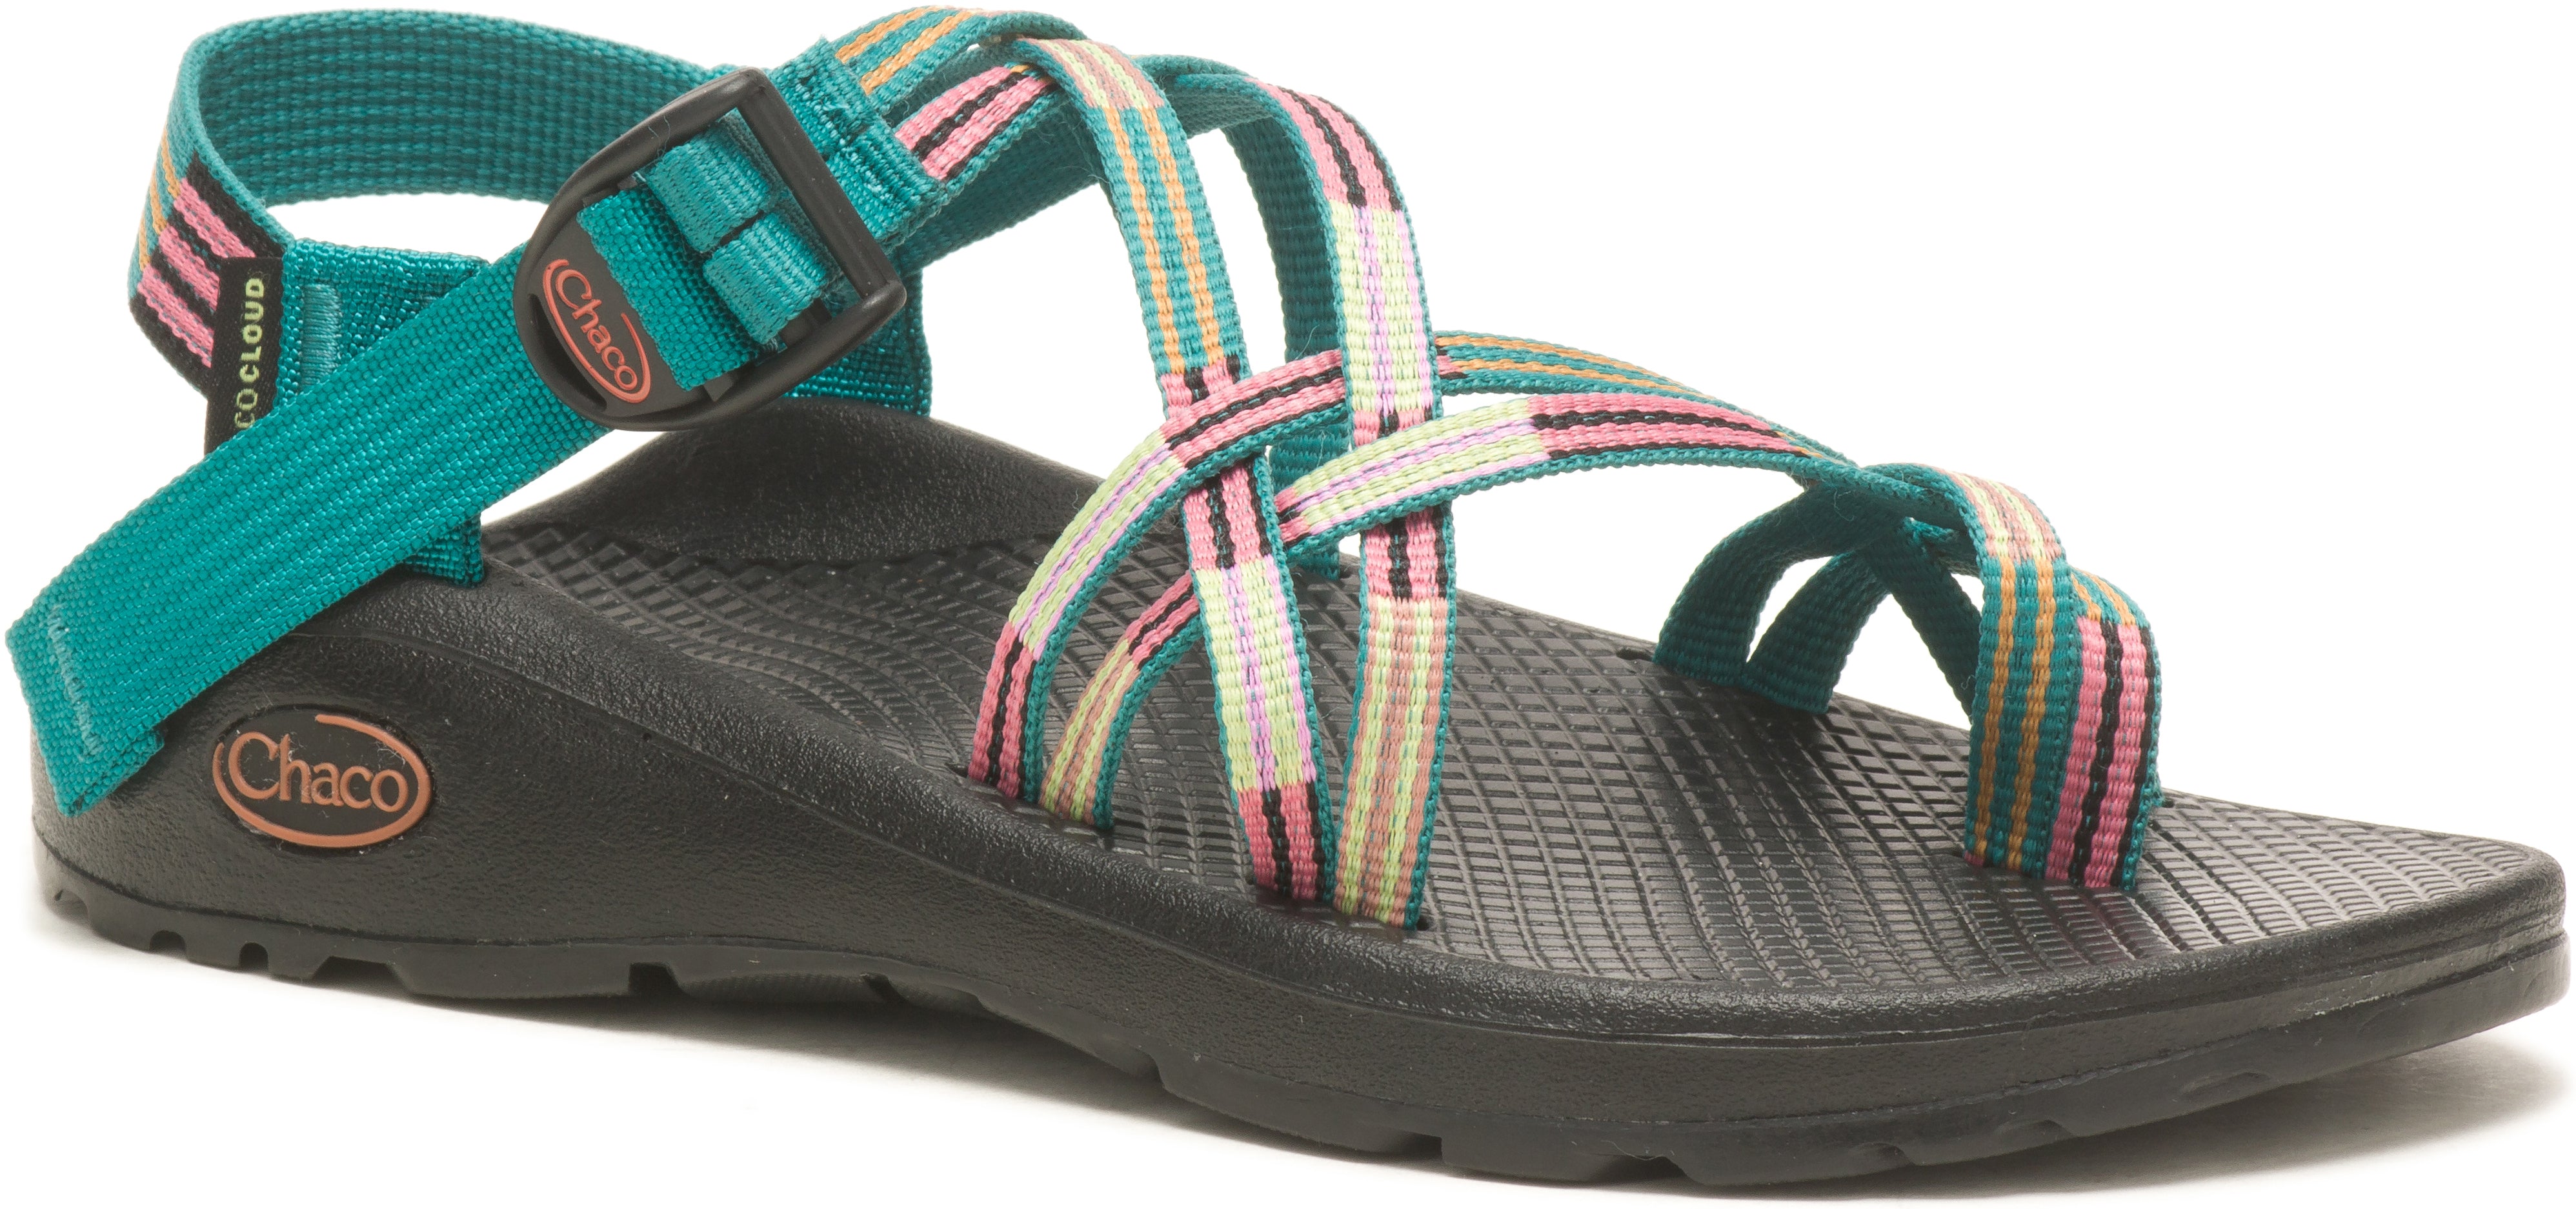 Chaco, Chaco Donna ZX/2 Cloud linea hang teal